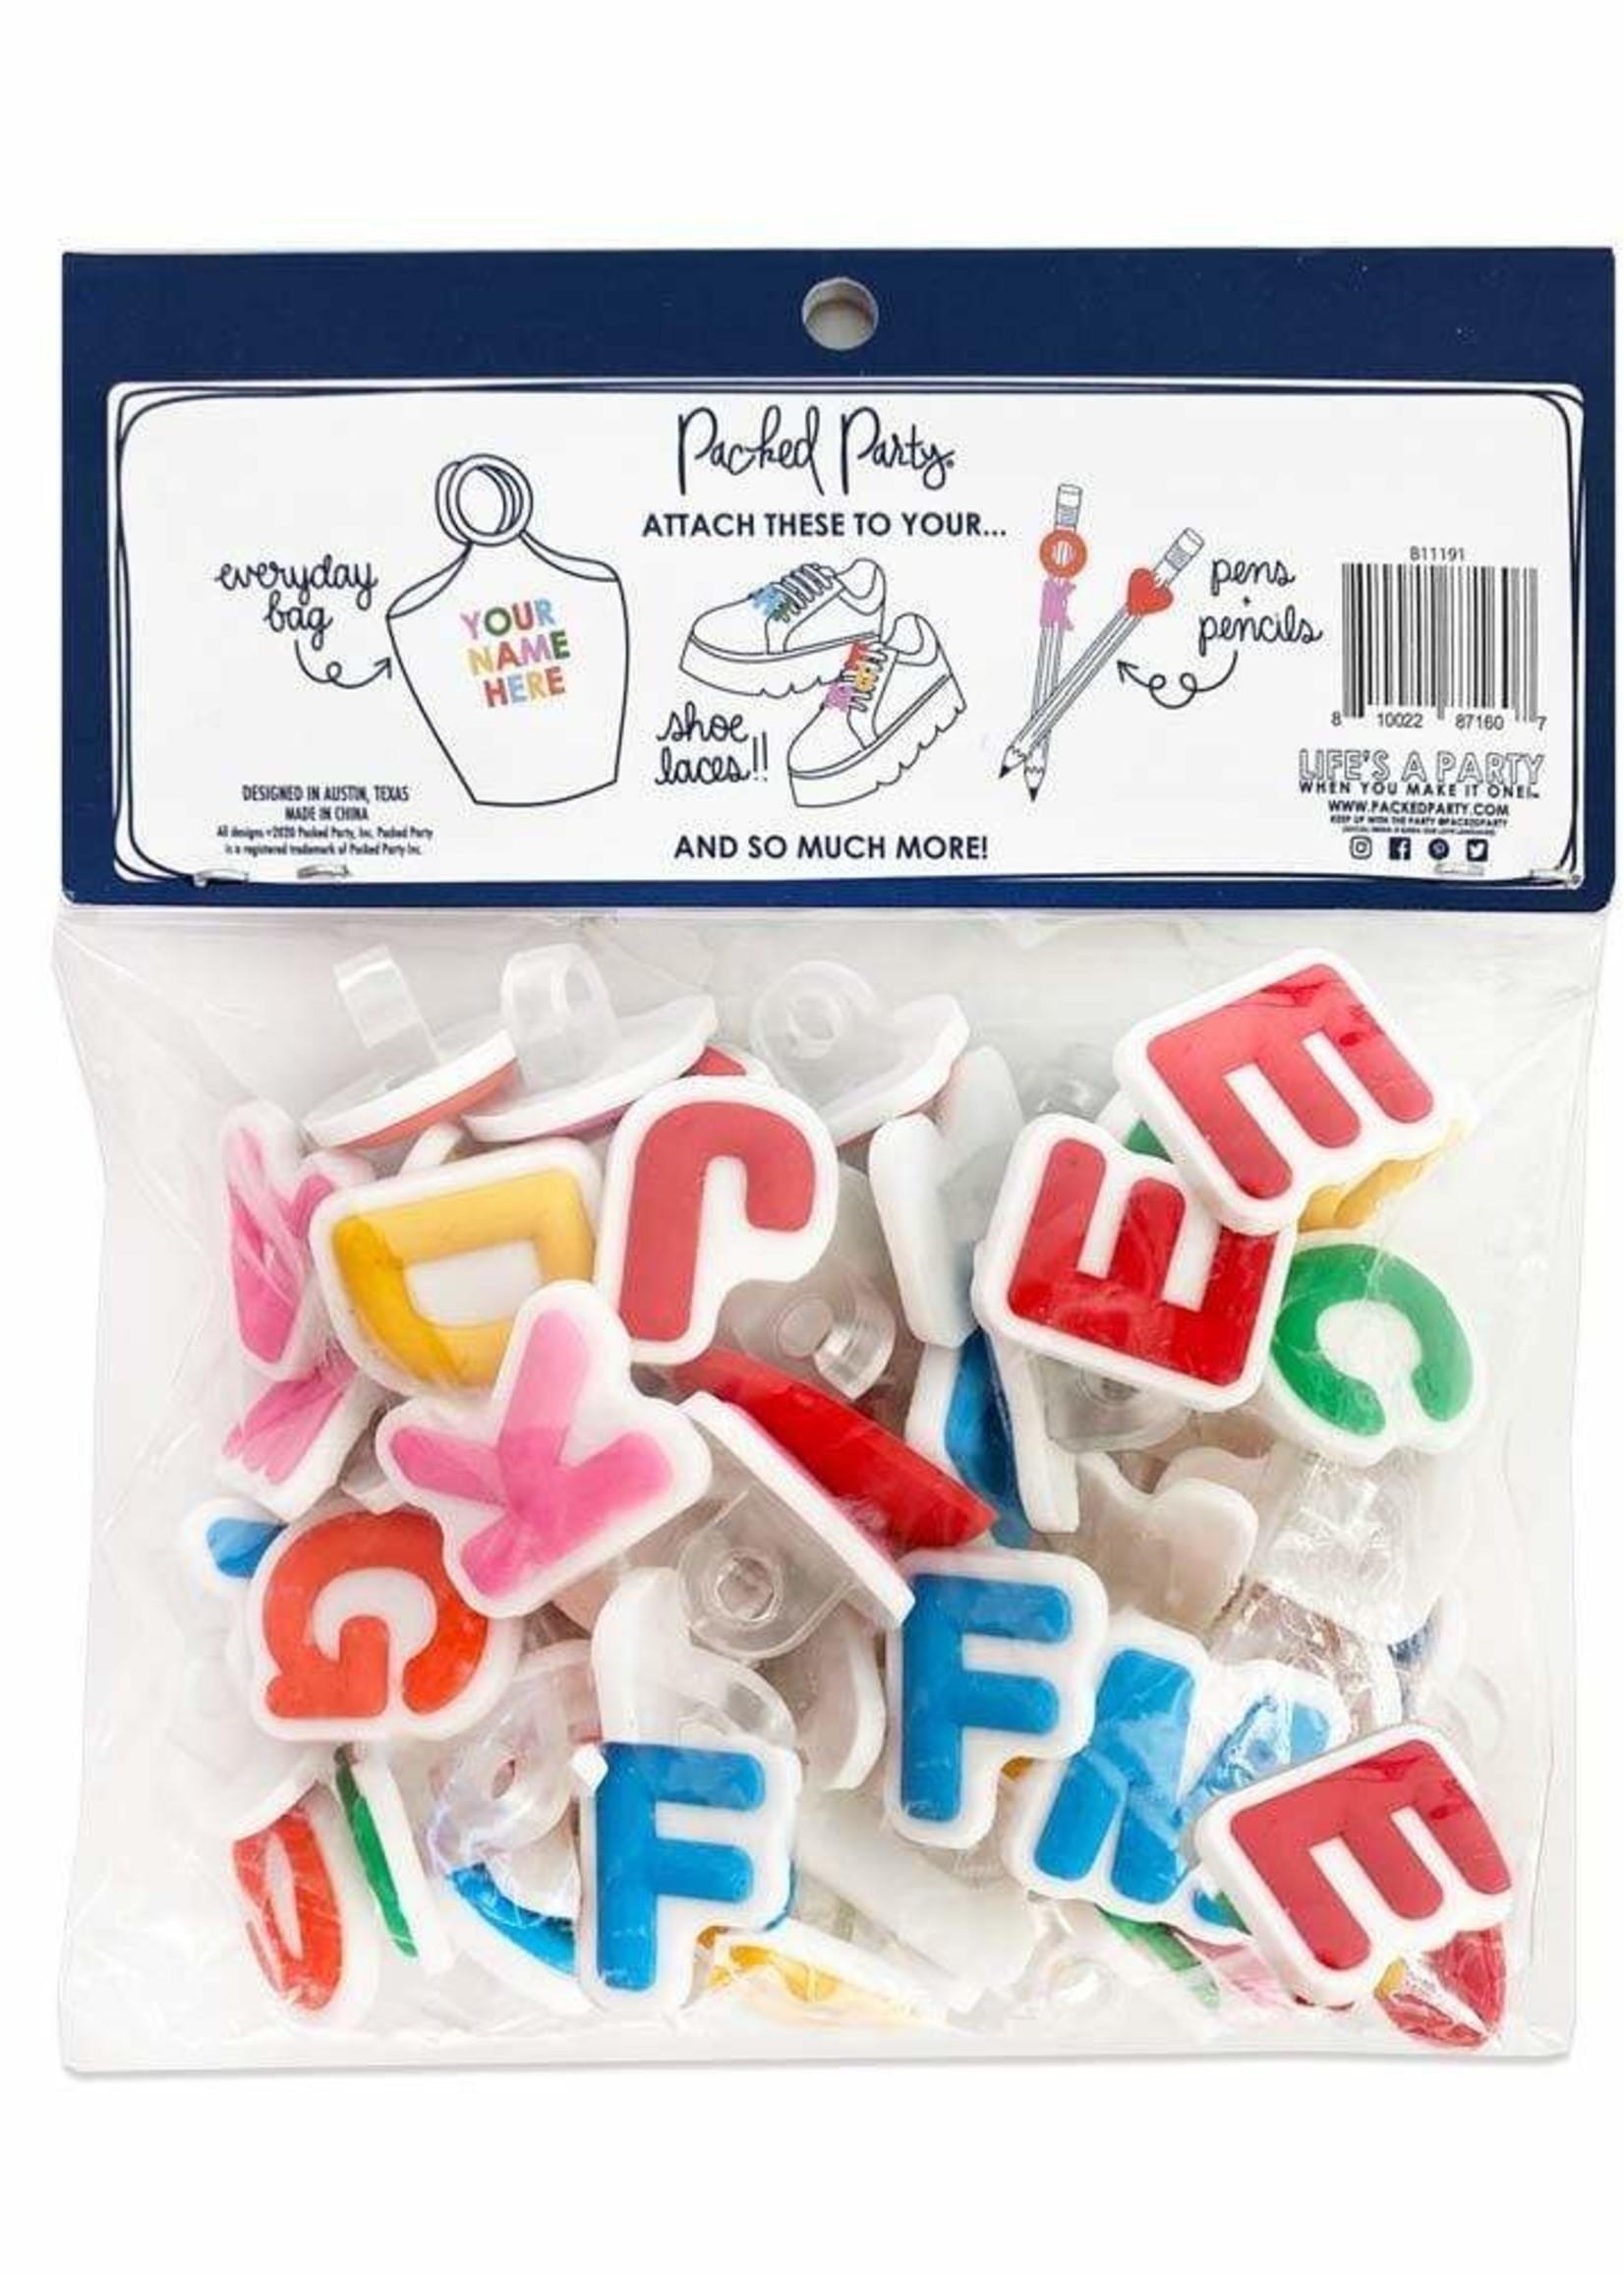 packed party Spell It Out Letter Attachments